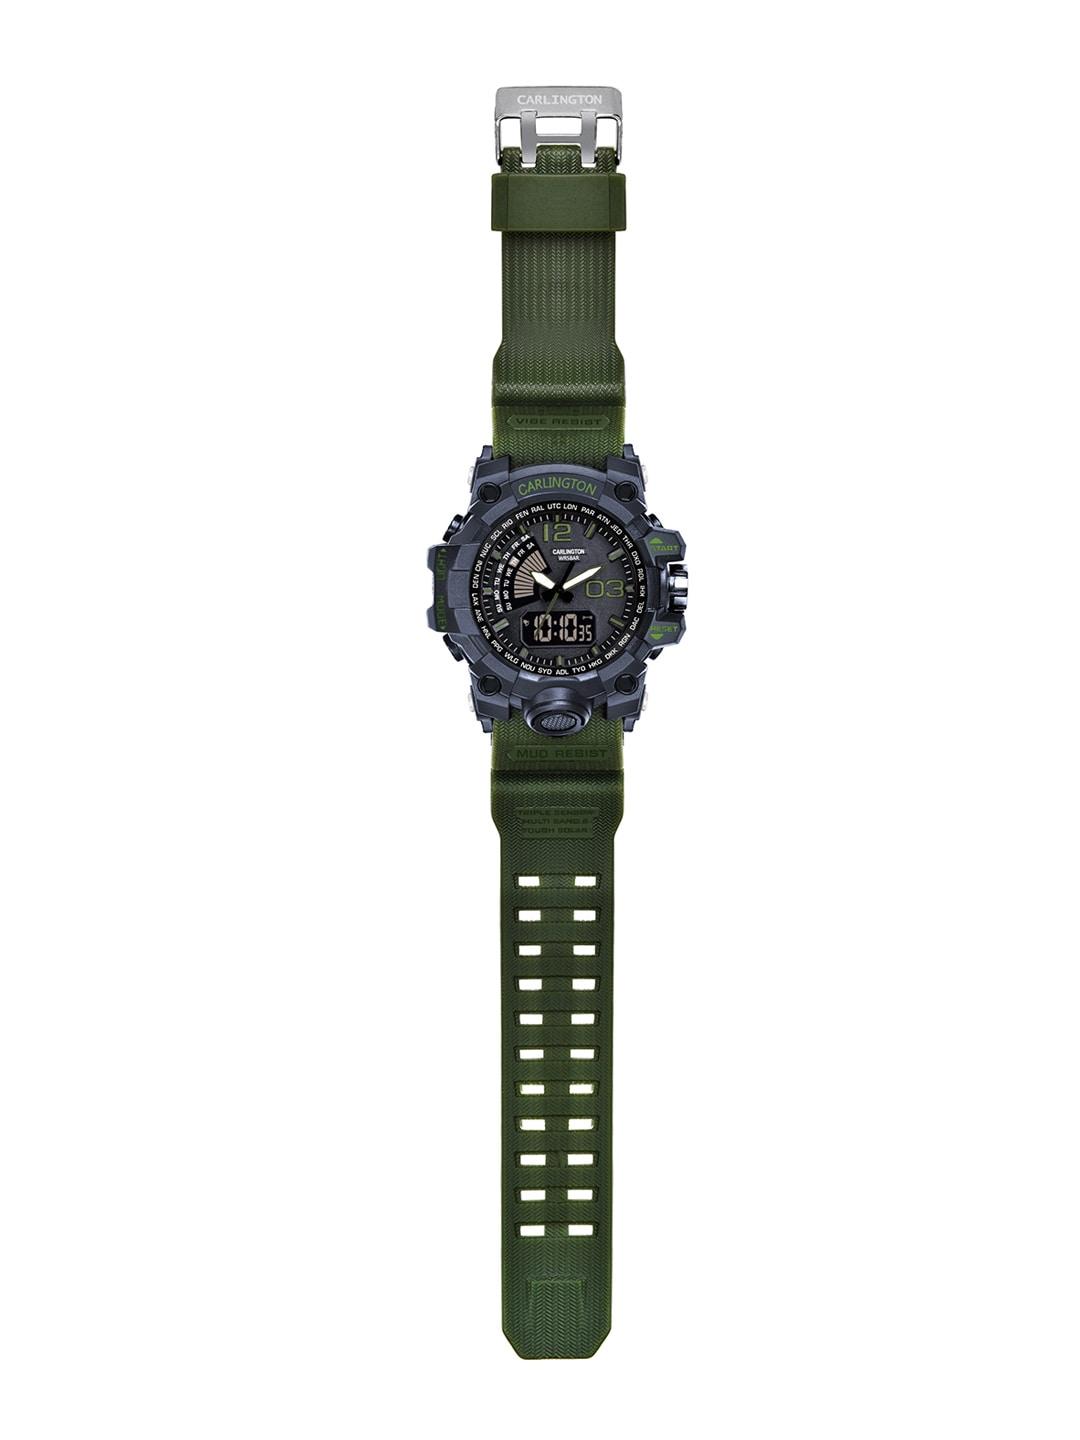 CARLINGTON Men Synthetic Straps Analogue and Digital Watch- CT 3366 Green